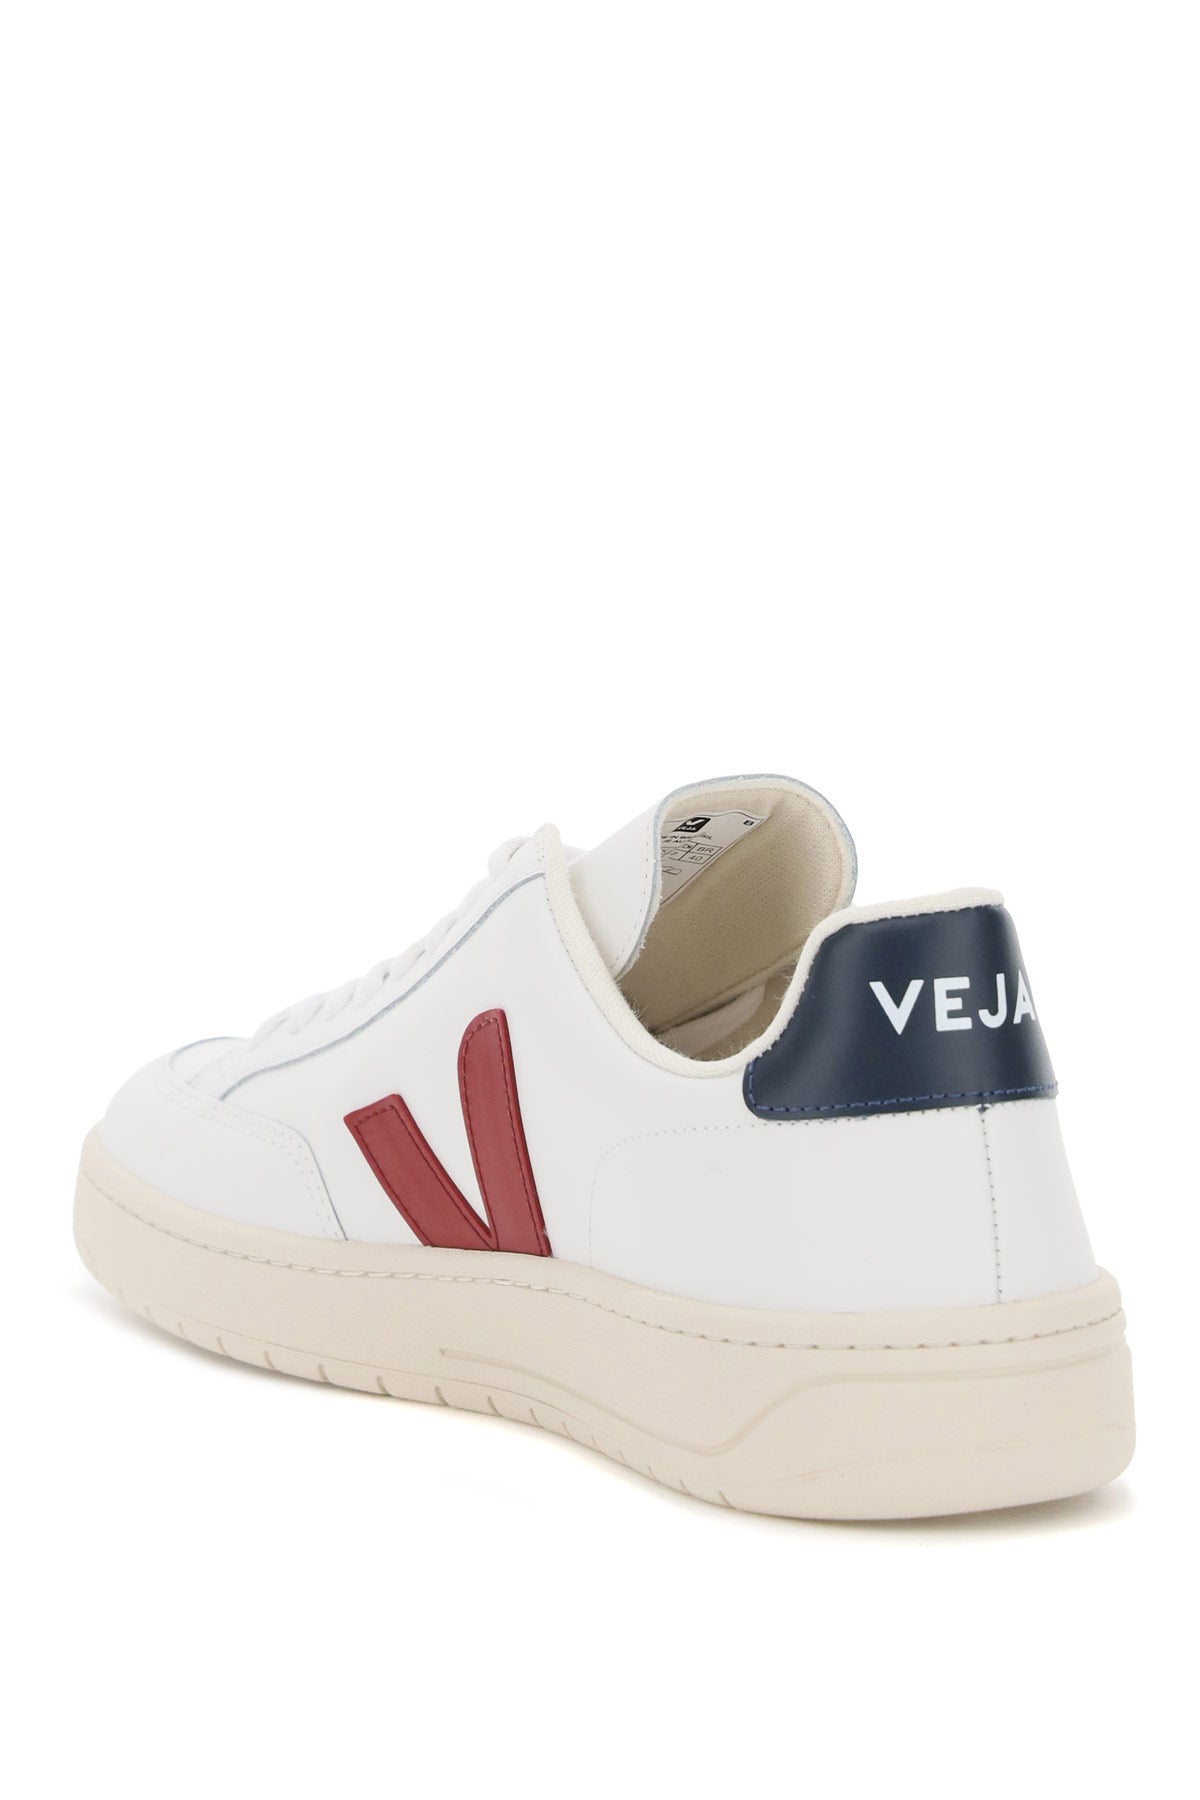 v-12 leather sneakers-2